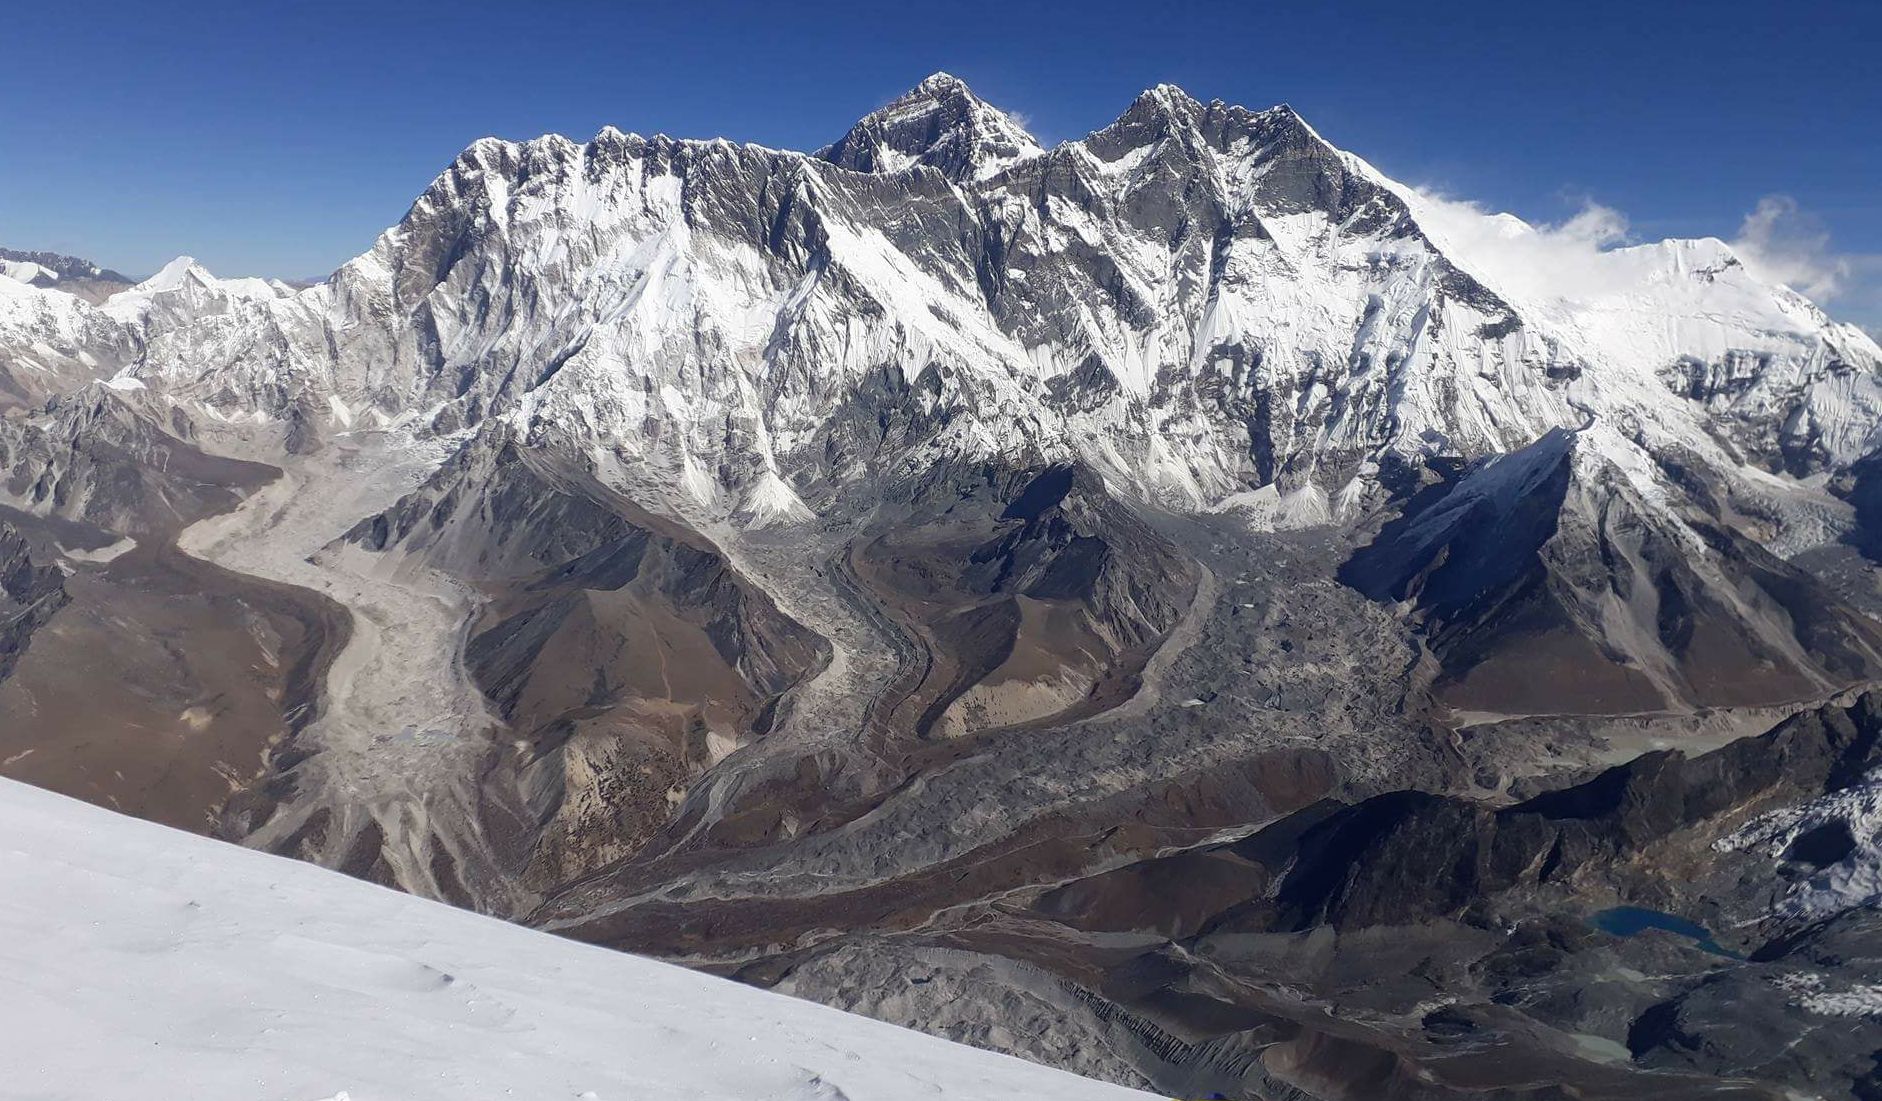 Chukhung Valley beneath the Nuptse-Lhotse Wall from above Bibre